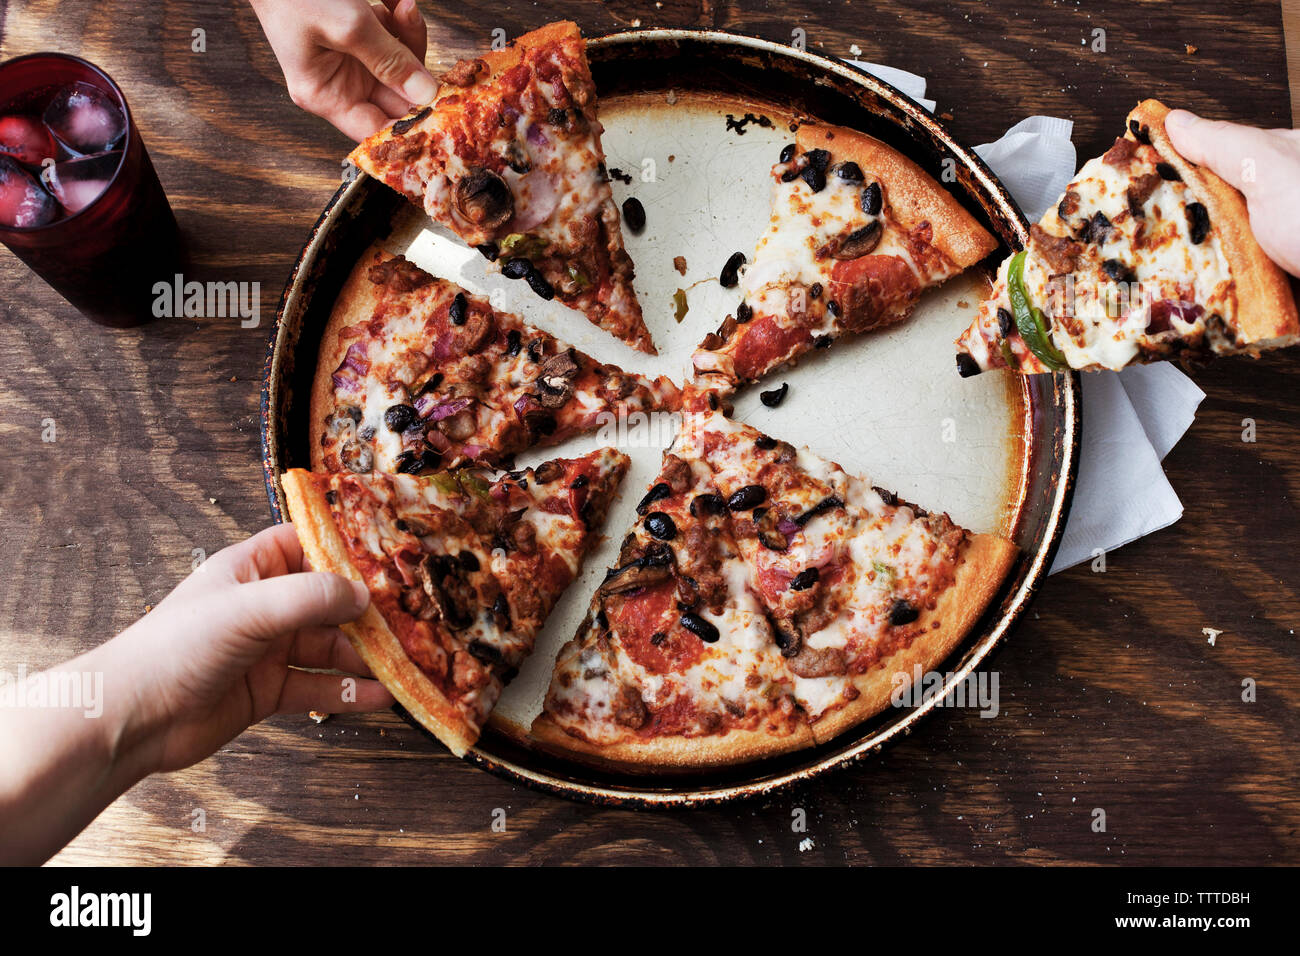 Overhead view of people eating pizza at wooden table Stock Photo